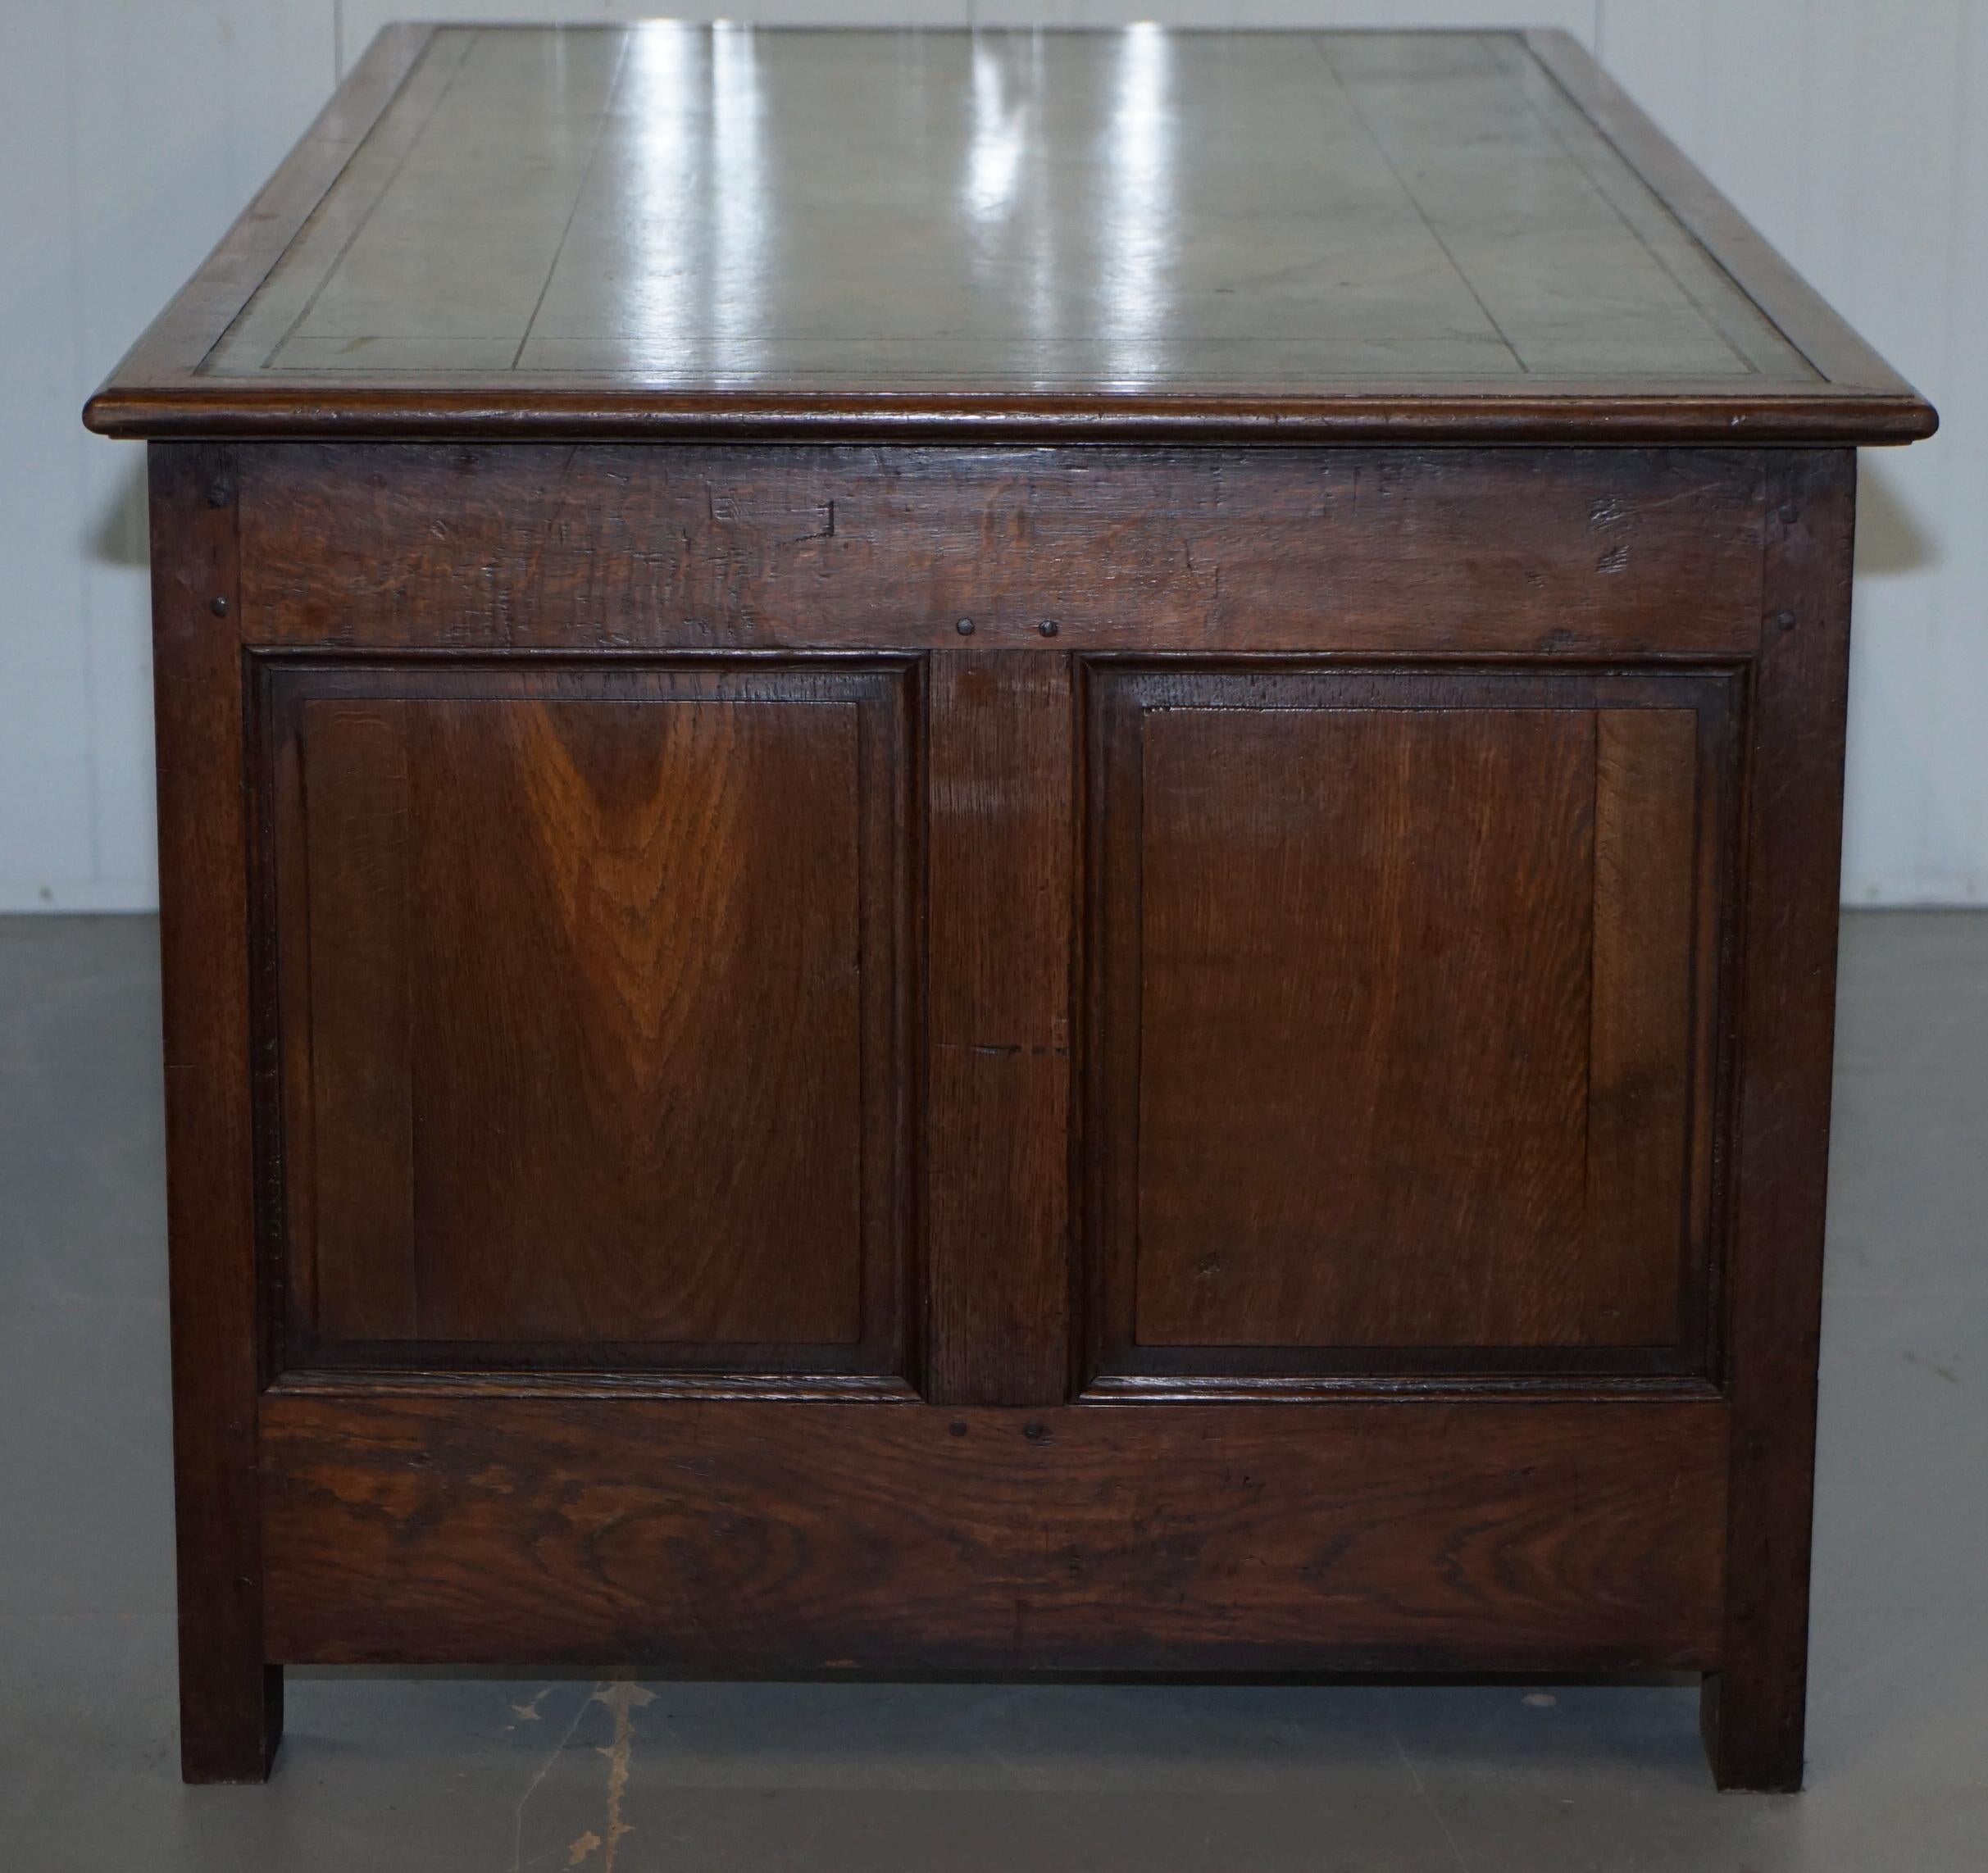 Stunning circa 1900 Oak & Green Leather Topped Desk or Shops Counter Arts Crafts 9